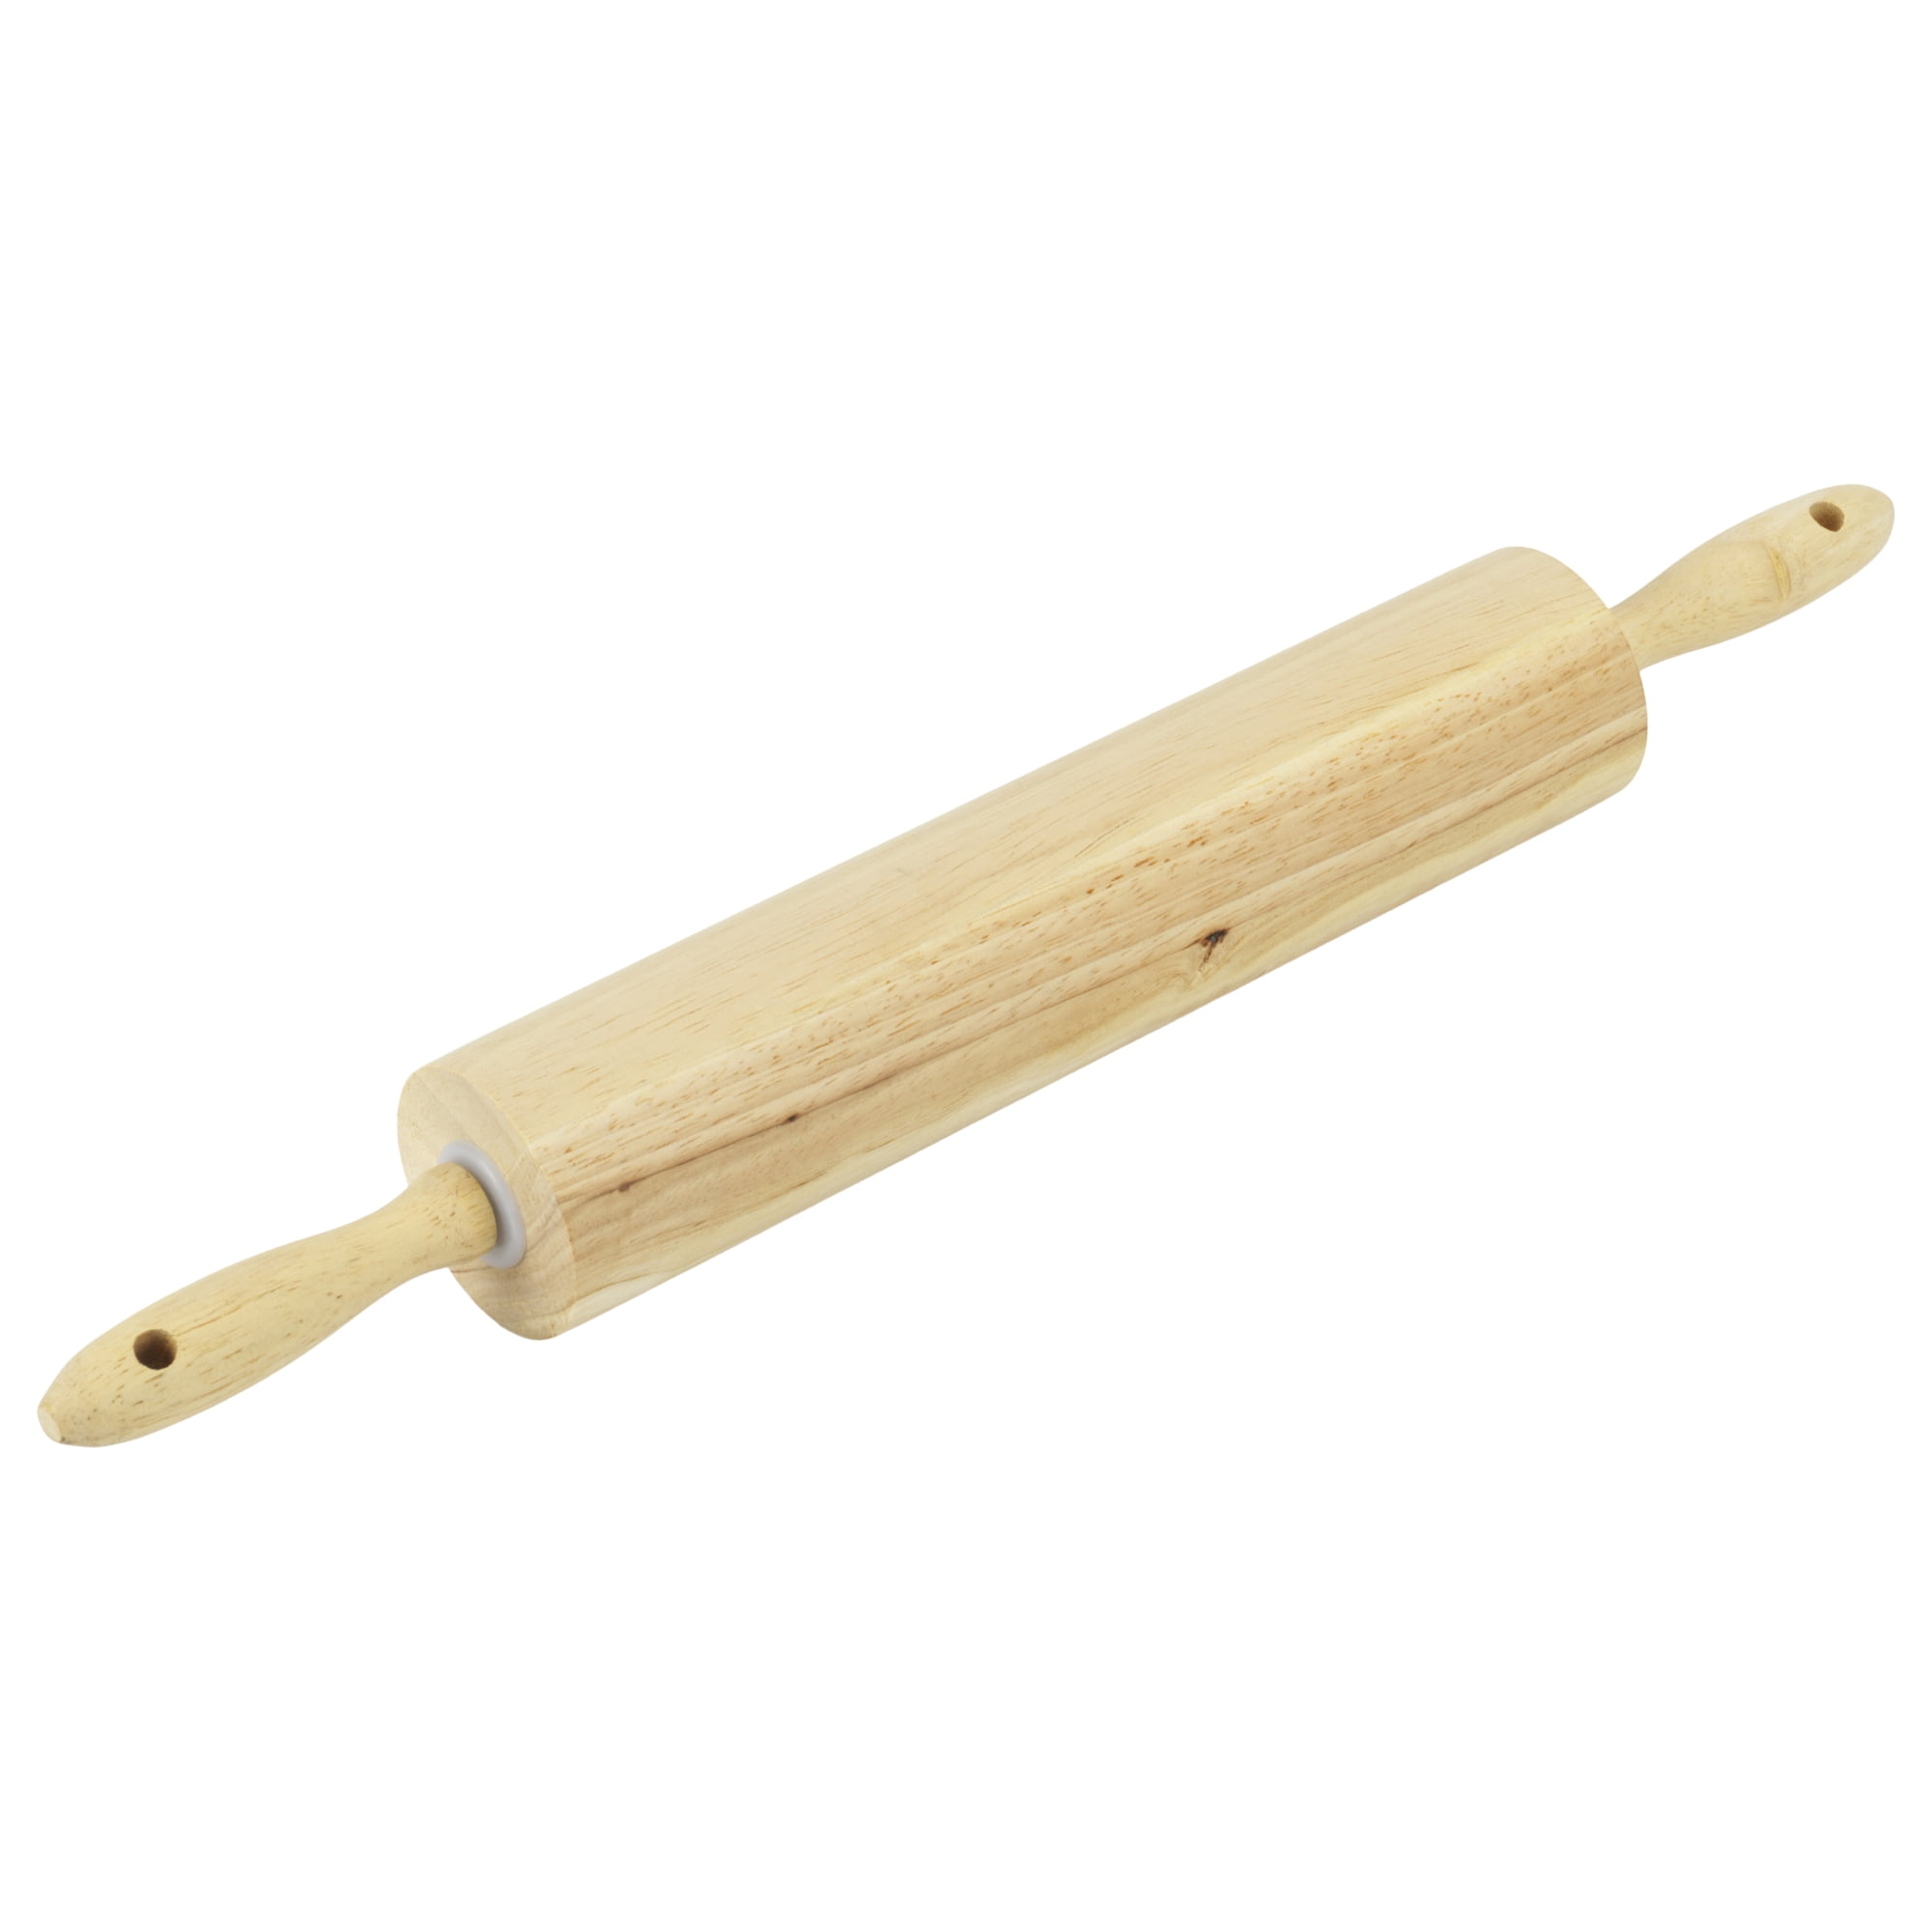 Mainstays 10 inch Durable Hardwood Rolling Pin